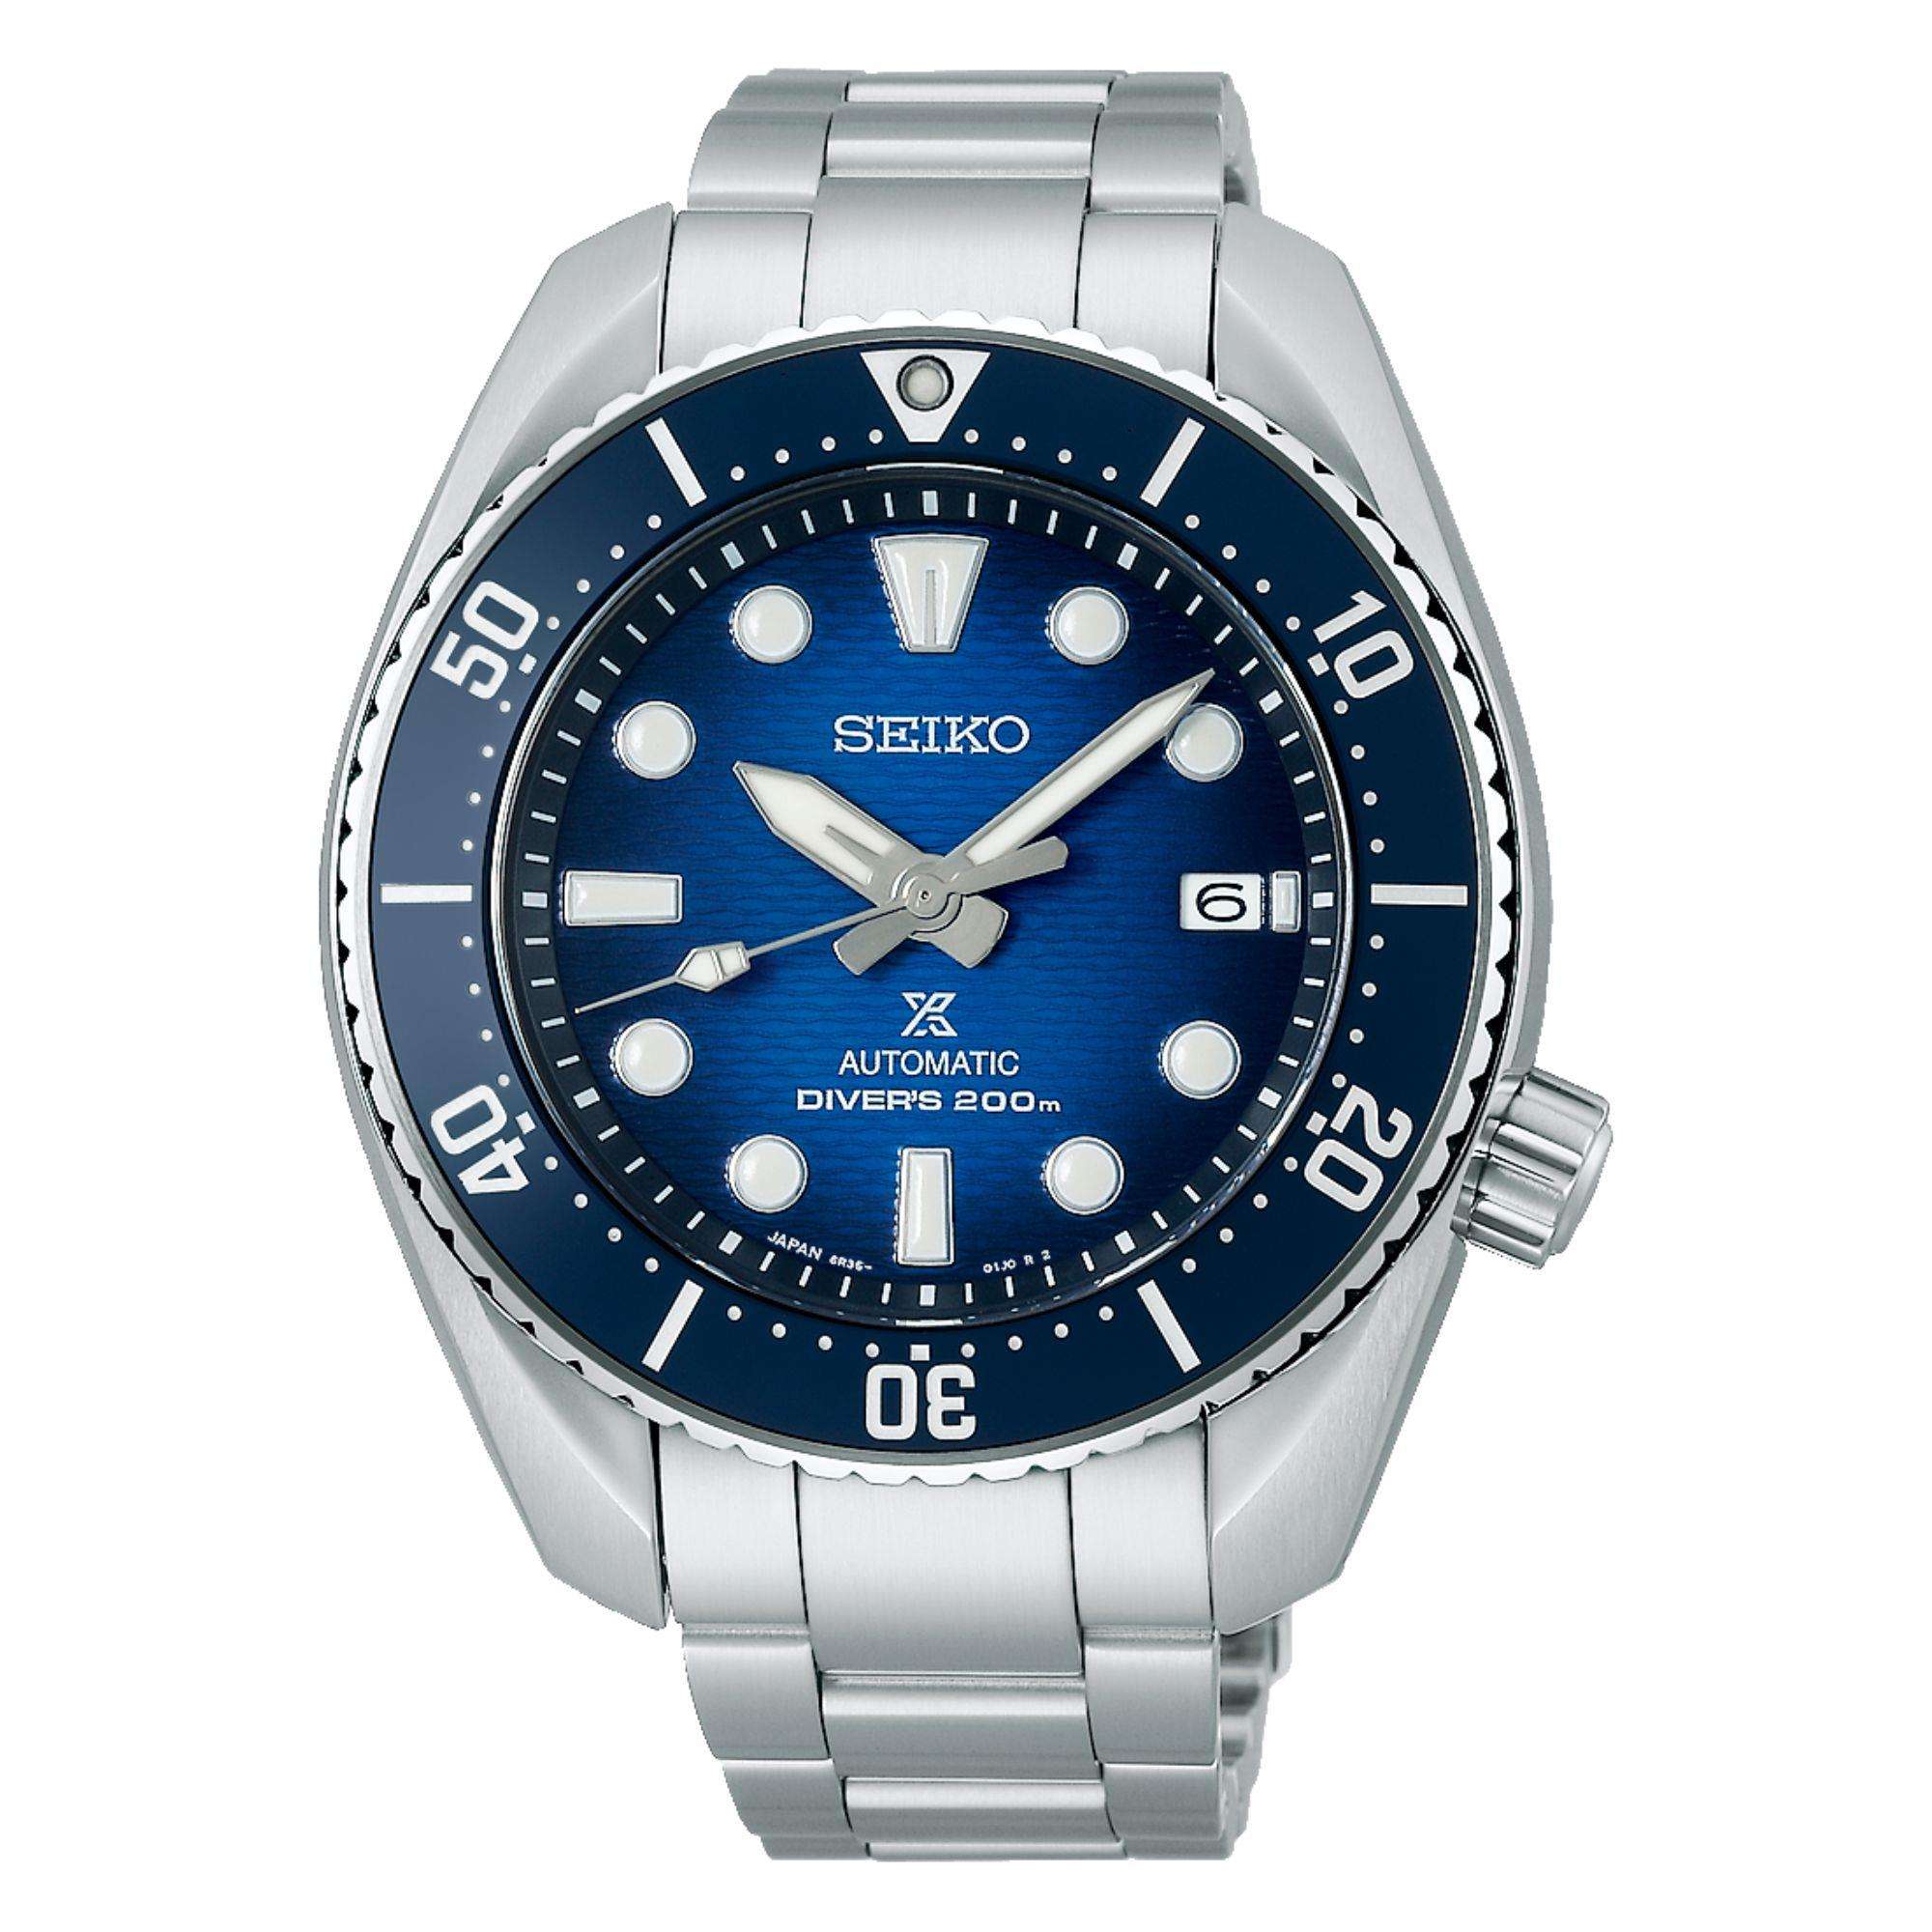 Seiko Prospex Watches: Next Day Delivery & 2 Year Warranty.